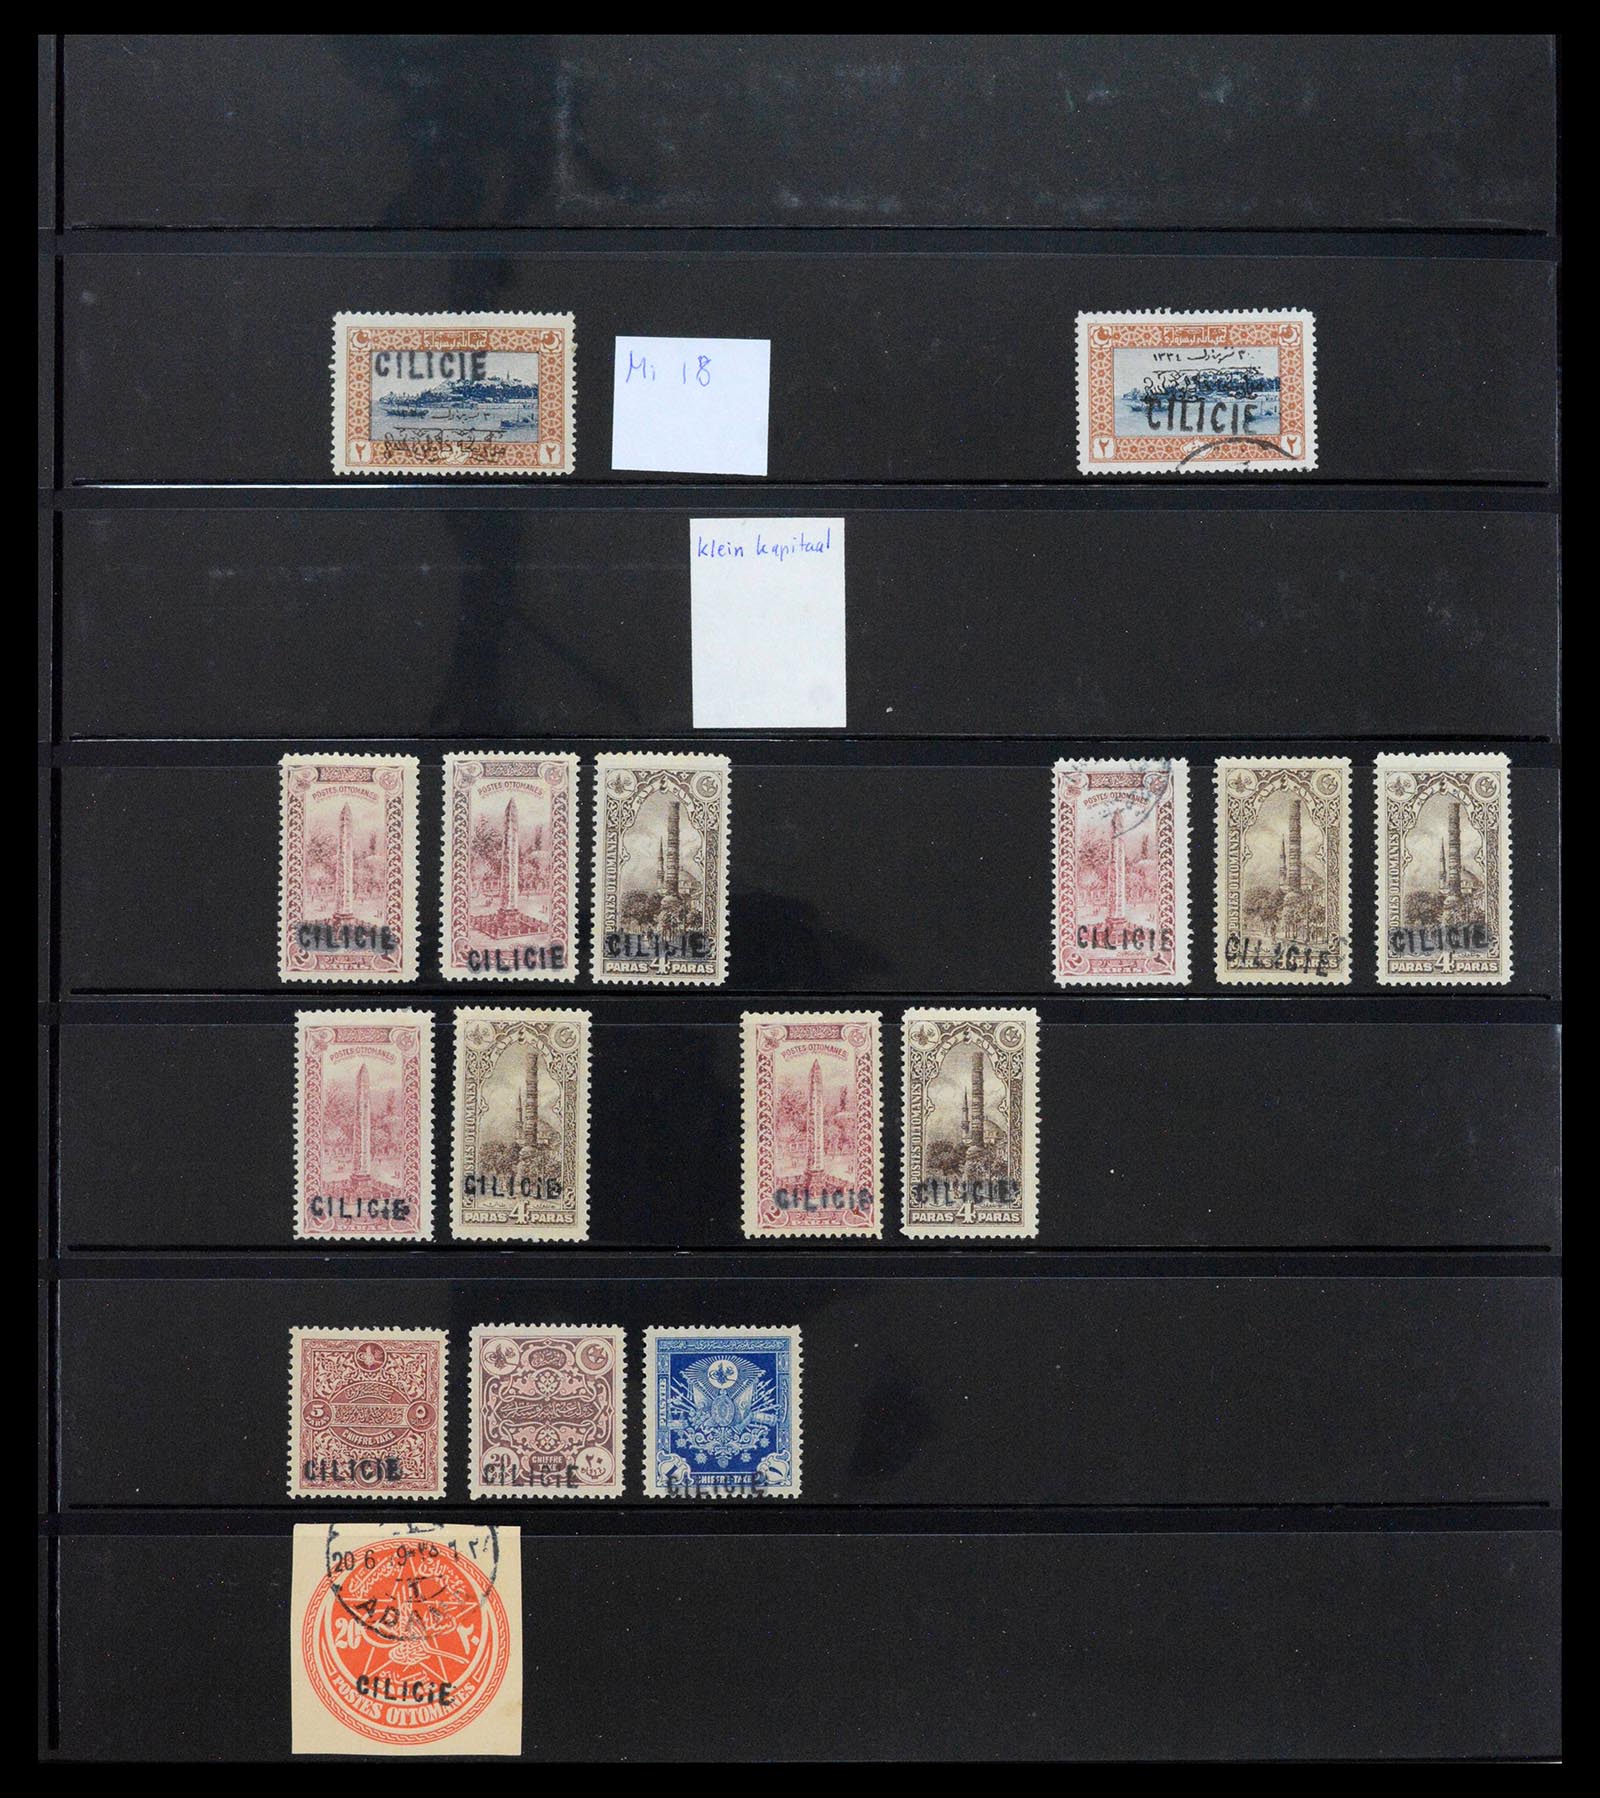 39457 0003 - Stamp collection 39457 Cilicia 1919-1921.